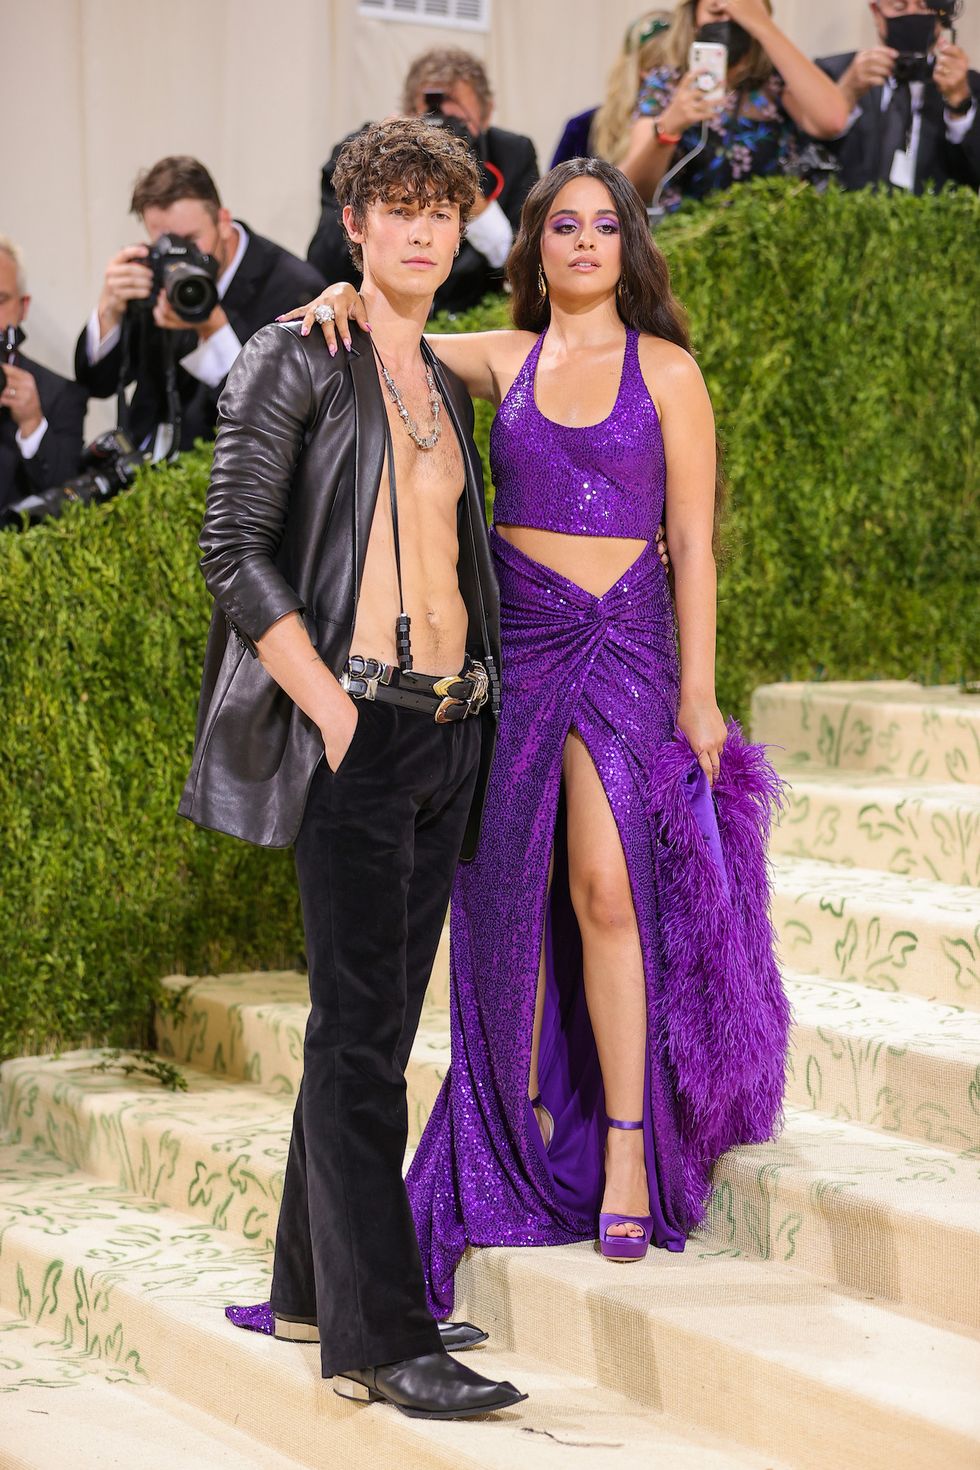 new york, new york   september 13 shawn mendes and camilla cabello attend the 2021 met gala celebrating in america a lexicon of fashion at metropolitan museum of art on september 13, 2021 in new york city photo by theo wargogetty images